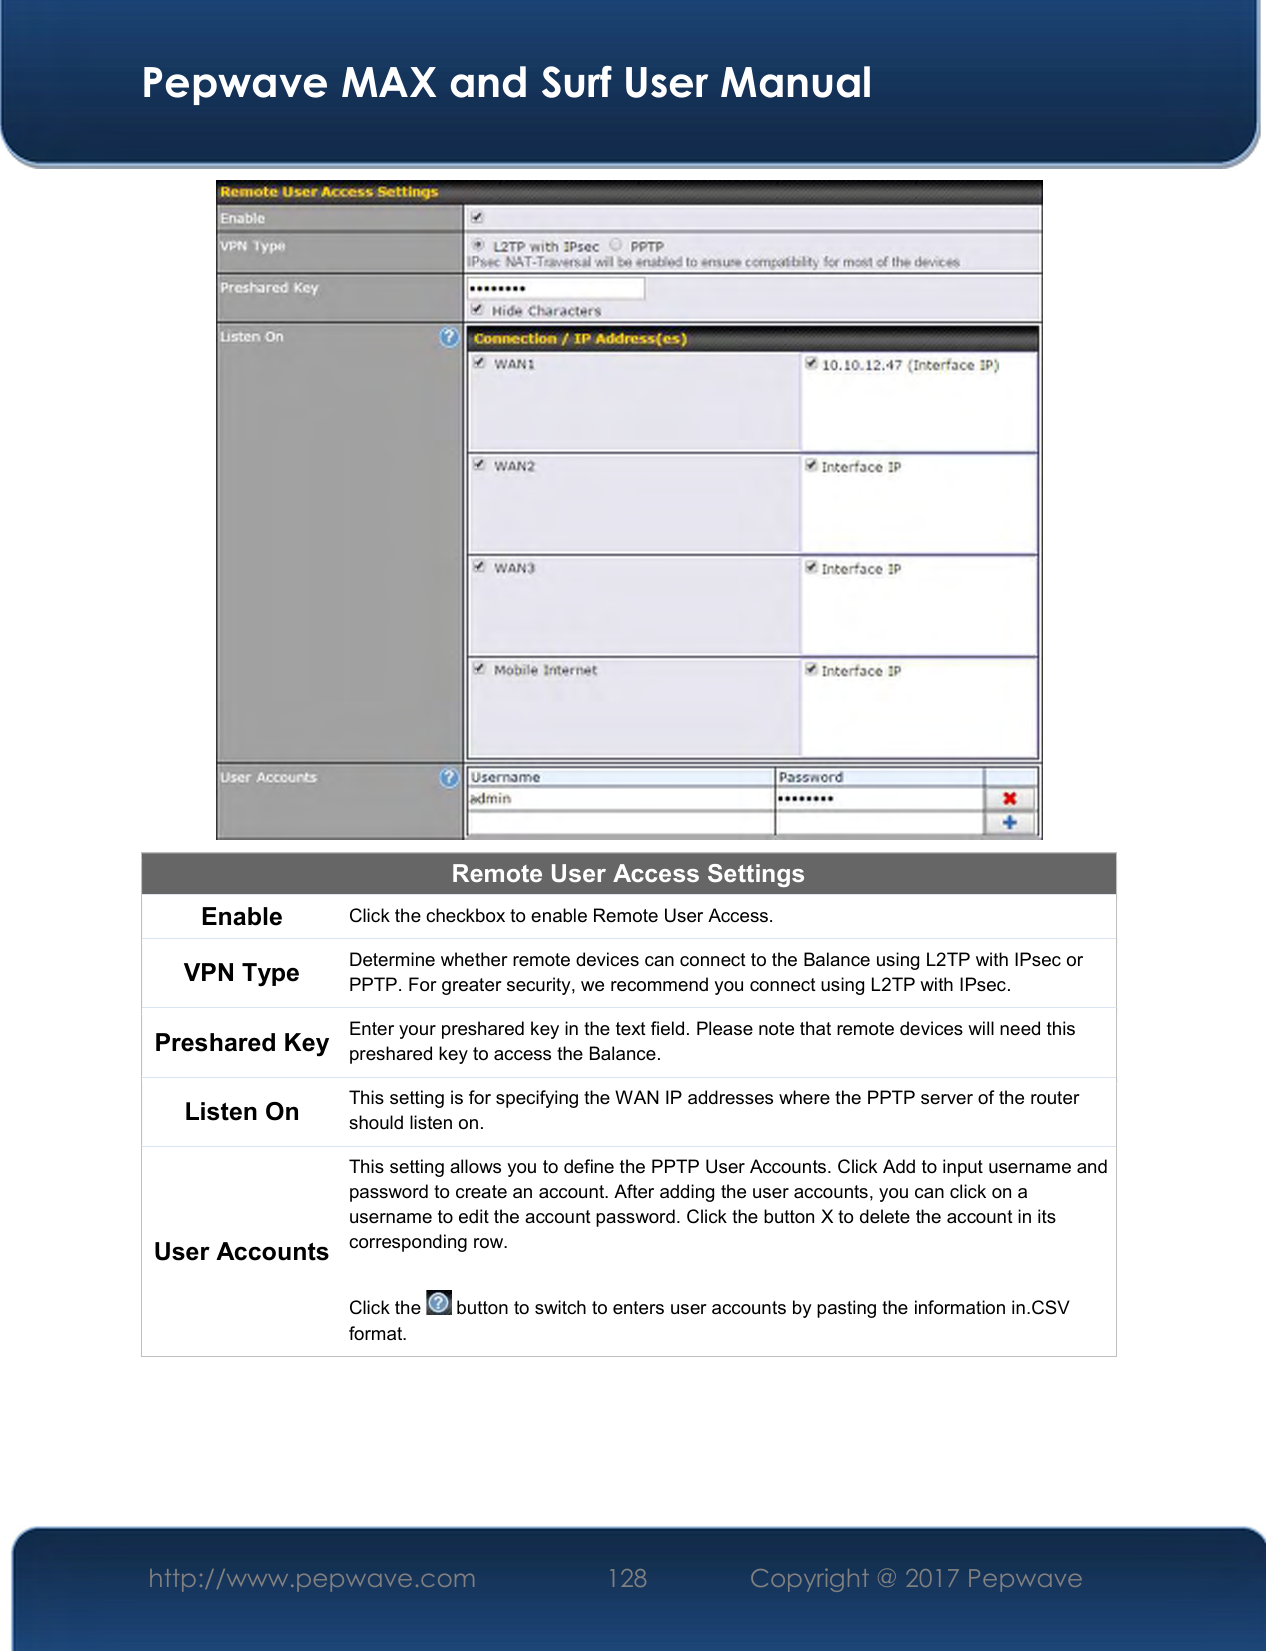  Pepwave MAX and Surf User Manual http://www.pepwave.com  128    Copyright @ 2017 Pepwave    Remote User Access Settings Enable  Click the checkbox to enable Remote User Access. VPN Type  Determine whether remote devices can connect to the Balance using L2TP with IPsec or PPTP. For greater security, we recommend you connect using L2TP with IPsec. Preshared Key Enter your preshared key in the text field. Please note that remote devices will need this preshared key to access the Balance. Listen On  This setting is for specifying the WAN IP addresses where the PPTP server of the router should listen on. User Accounts This setting allows you to define the PPTP User Accounts. Click Add to input username and password to create an account. After adding the user accounts, you can click on a username to edit the account password. Click the button X to delete the account in its corresponding row.  Click the   button to switch to enters user accounts by pasting the information in.CSV format.  